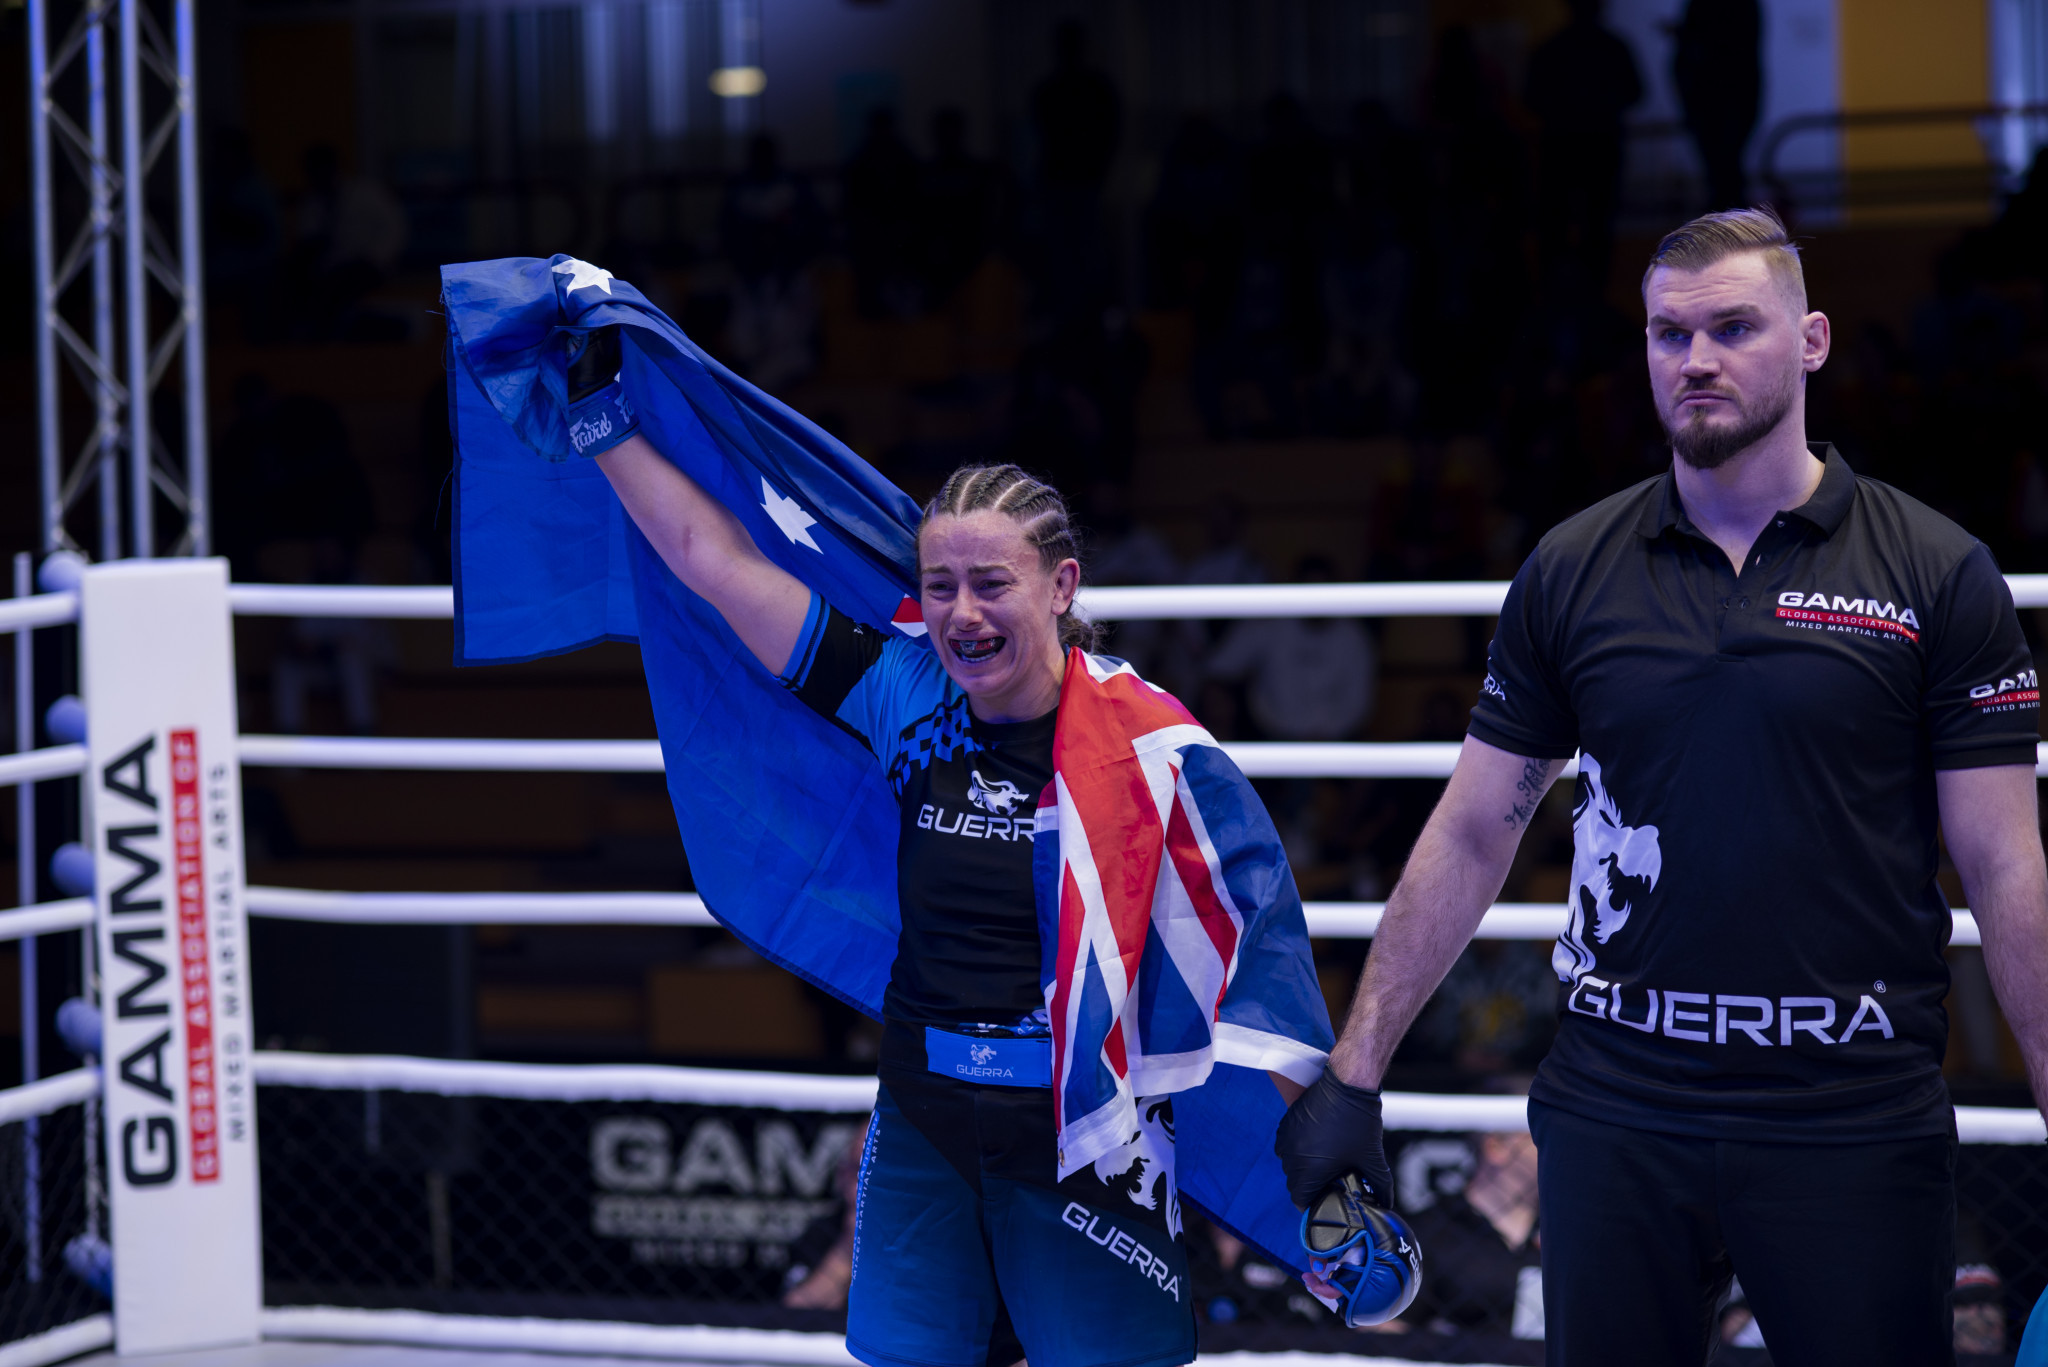 Australia's Danielle Curtis also caused an upset in the women's under-65.8kg final as she snatched gold from Meruyert Ibrayeva of Kazakhstan ©GAMMA